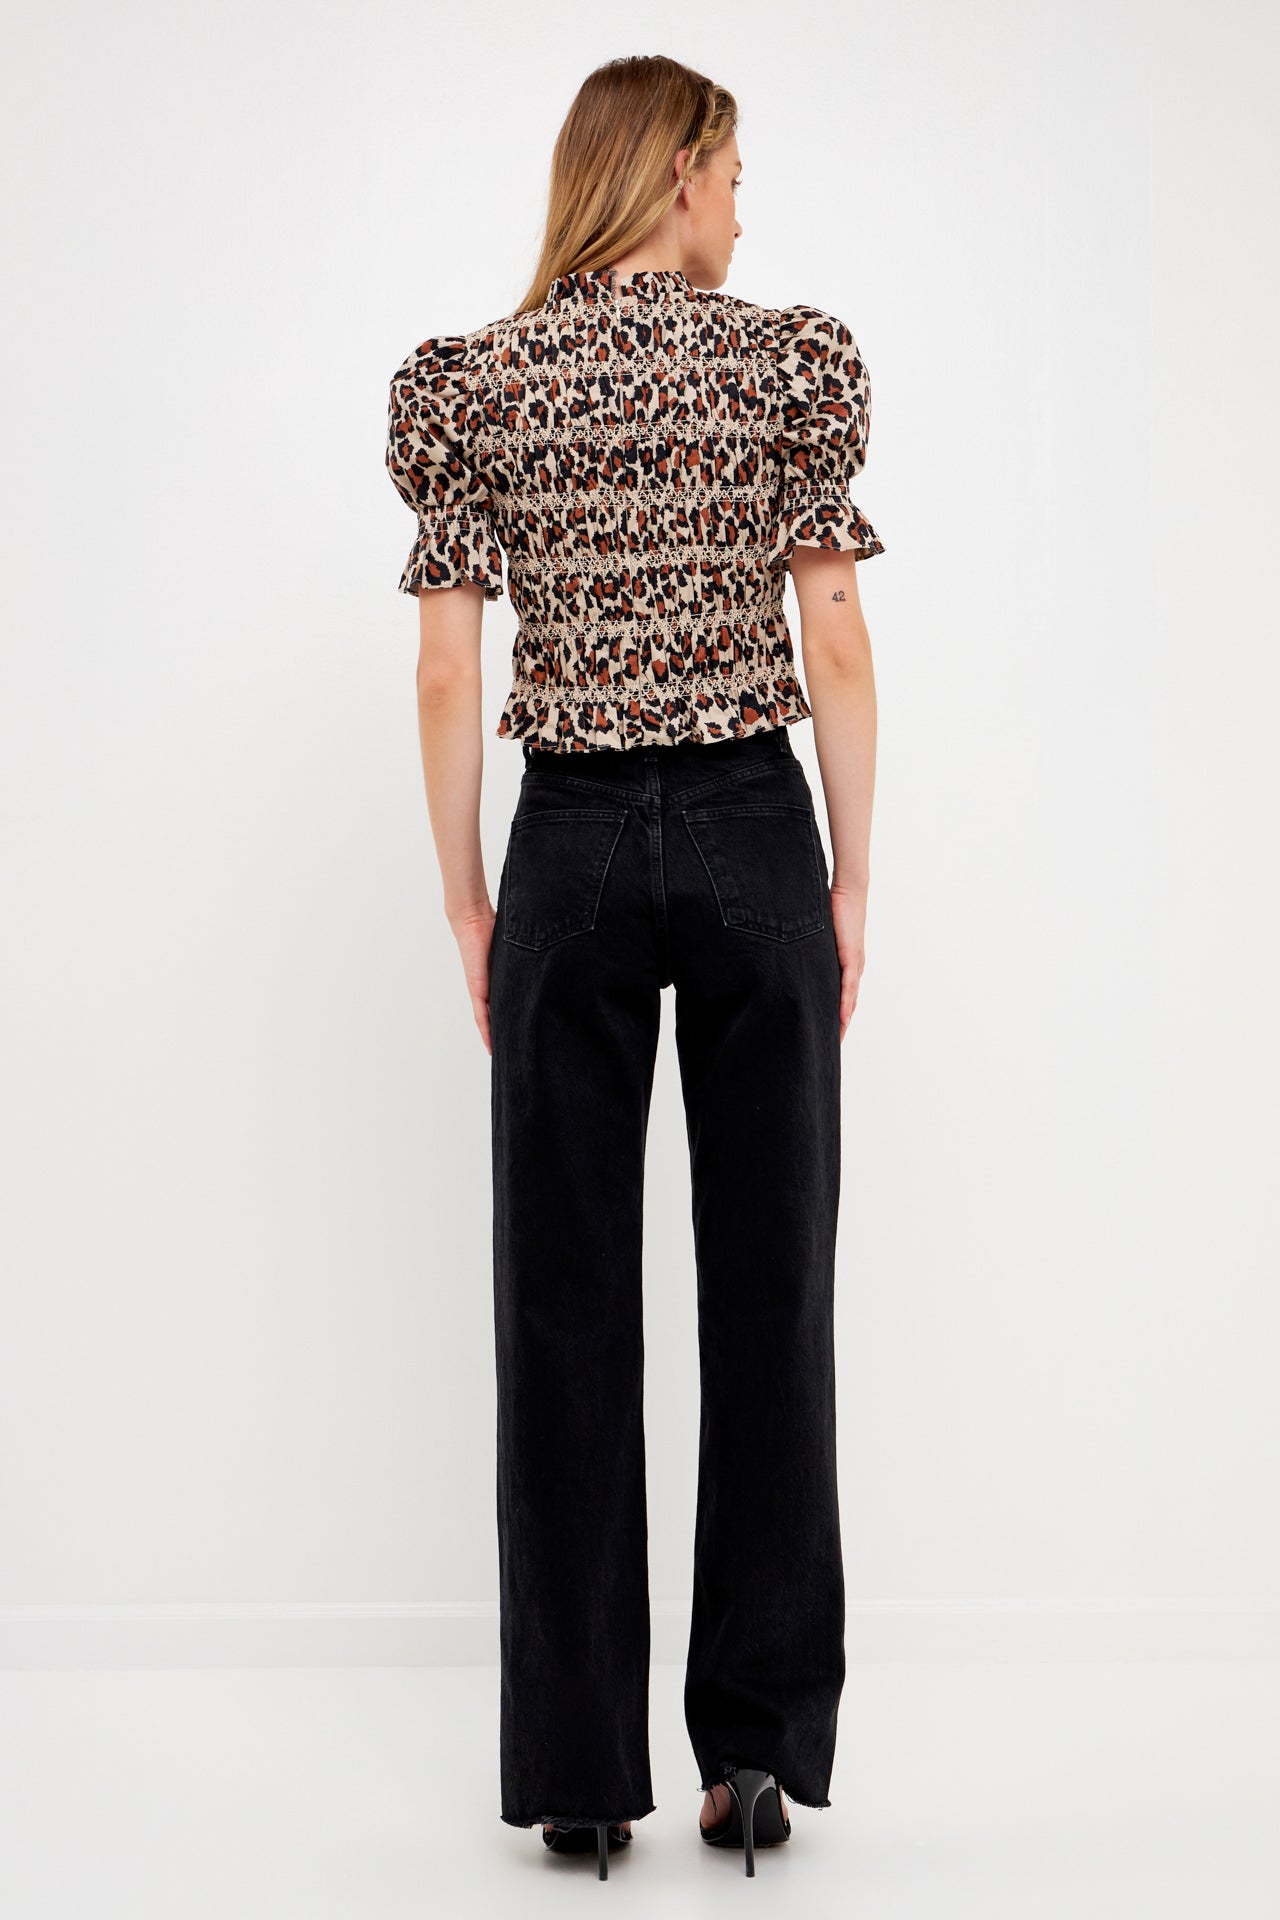 ENGLISH FACTORY - Leopard Print Puff Short Sleeve Top - TOPS available at Objectrare